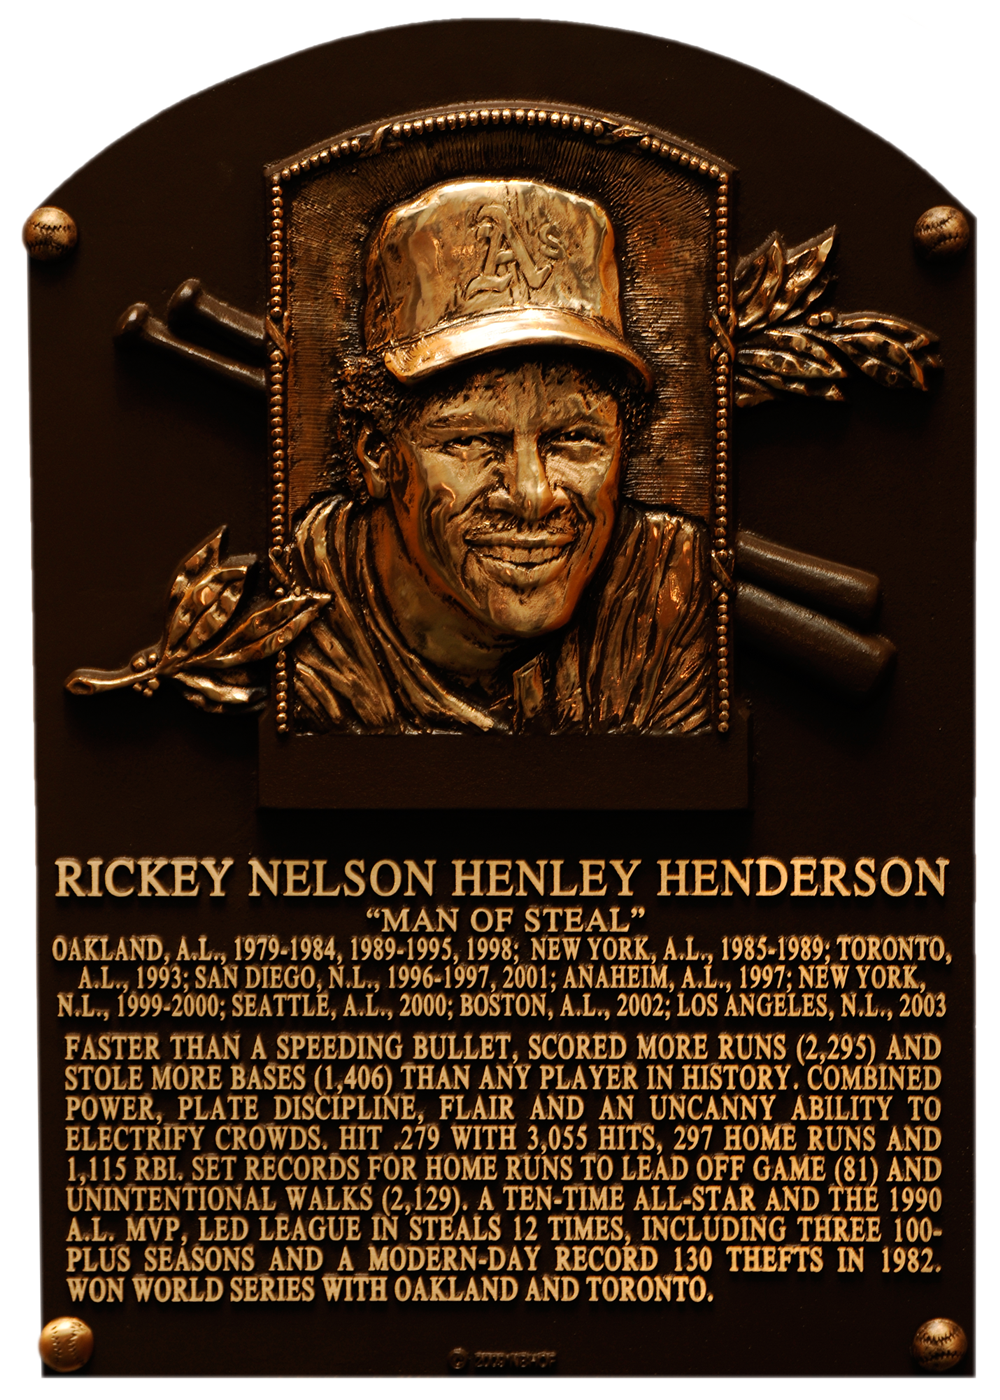 Ricky Henderson Used Steroids*